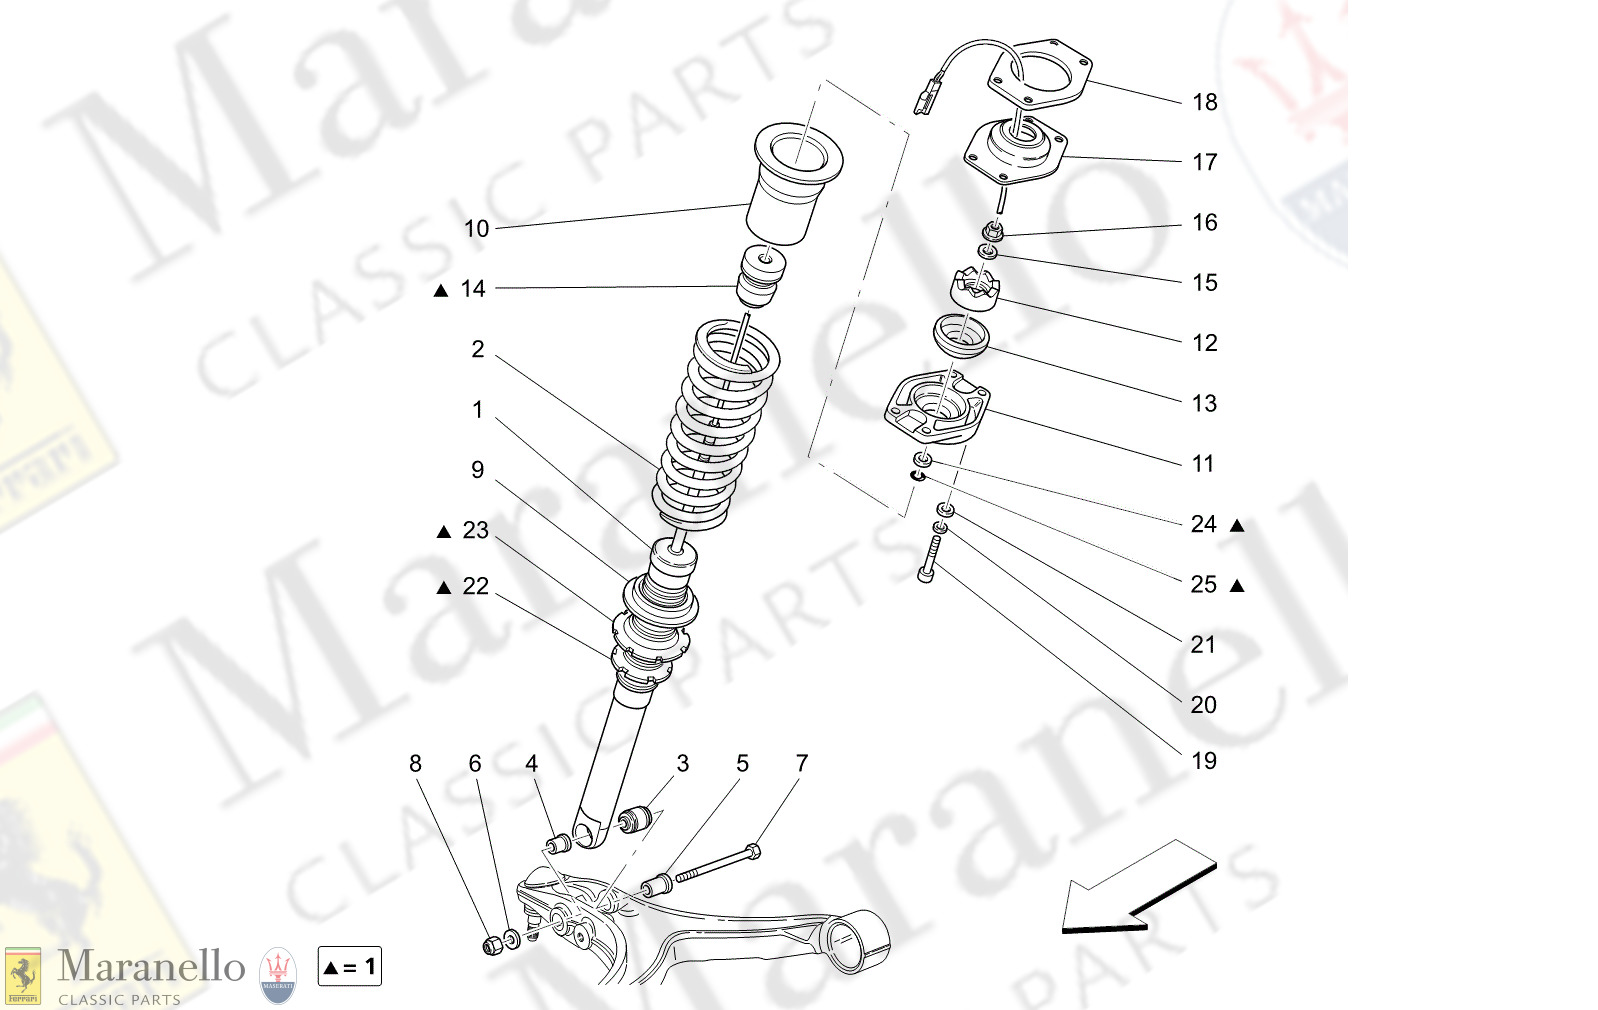 06.11 - 11 - 0611 - 11 Front Shock Absorber Devices